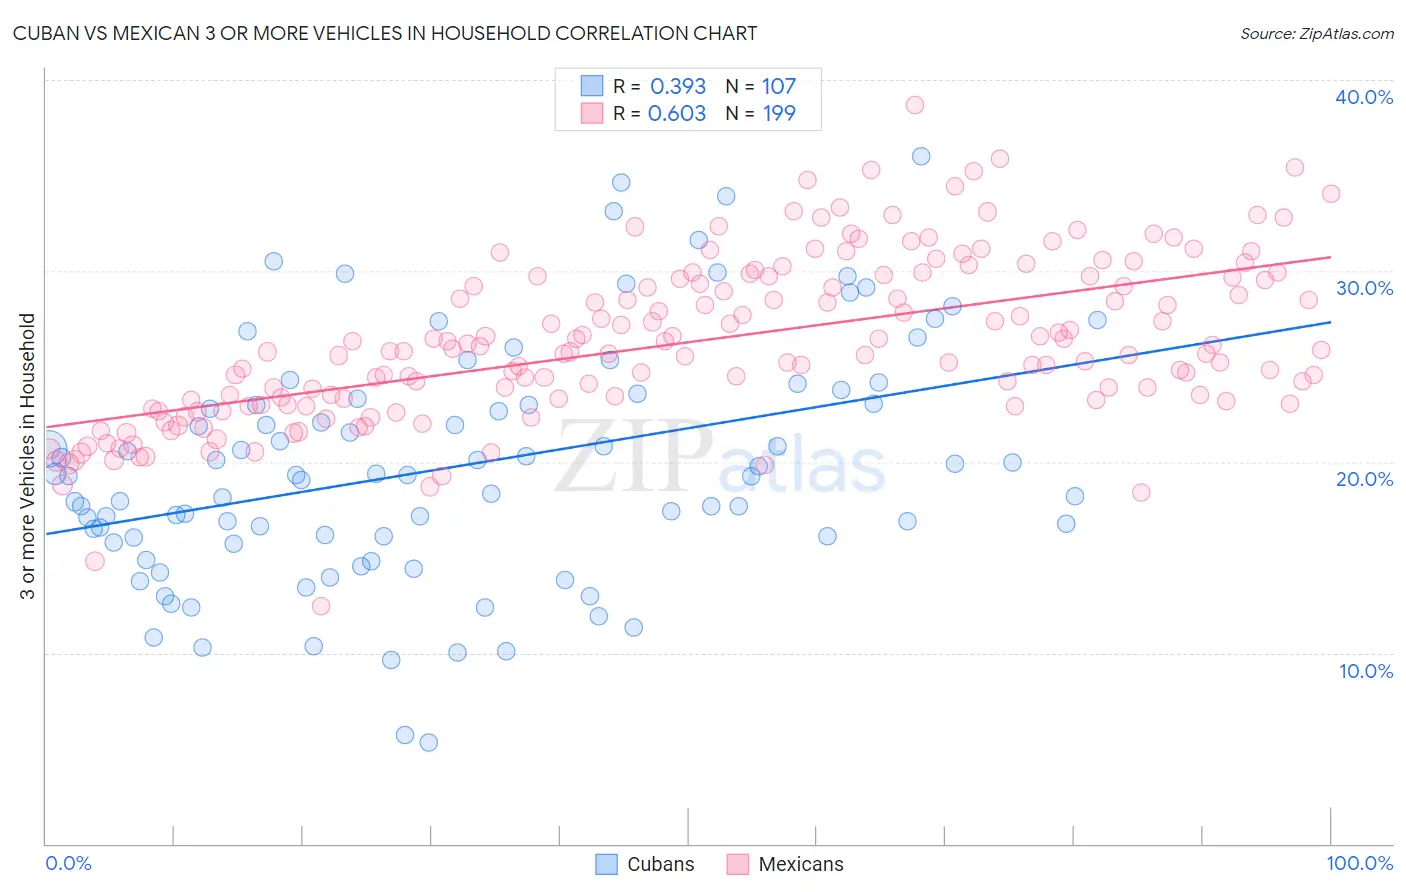 Cuban vs Mexican 3 or more Vehicles in Household